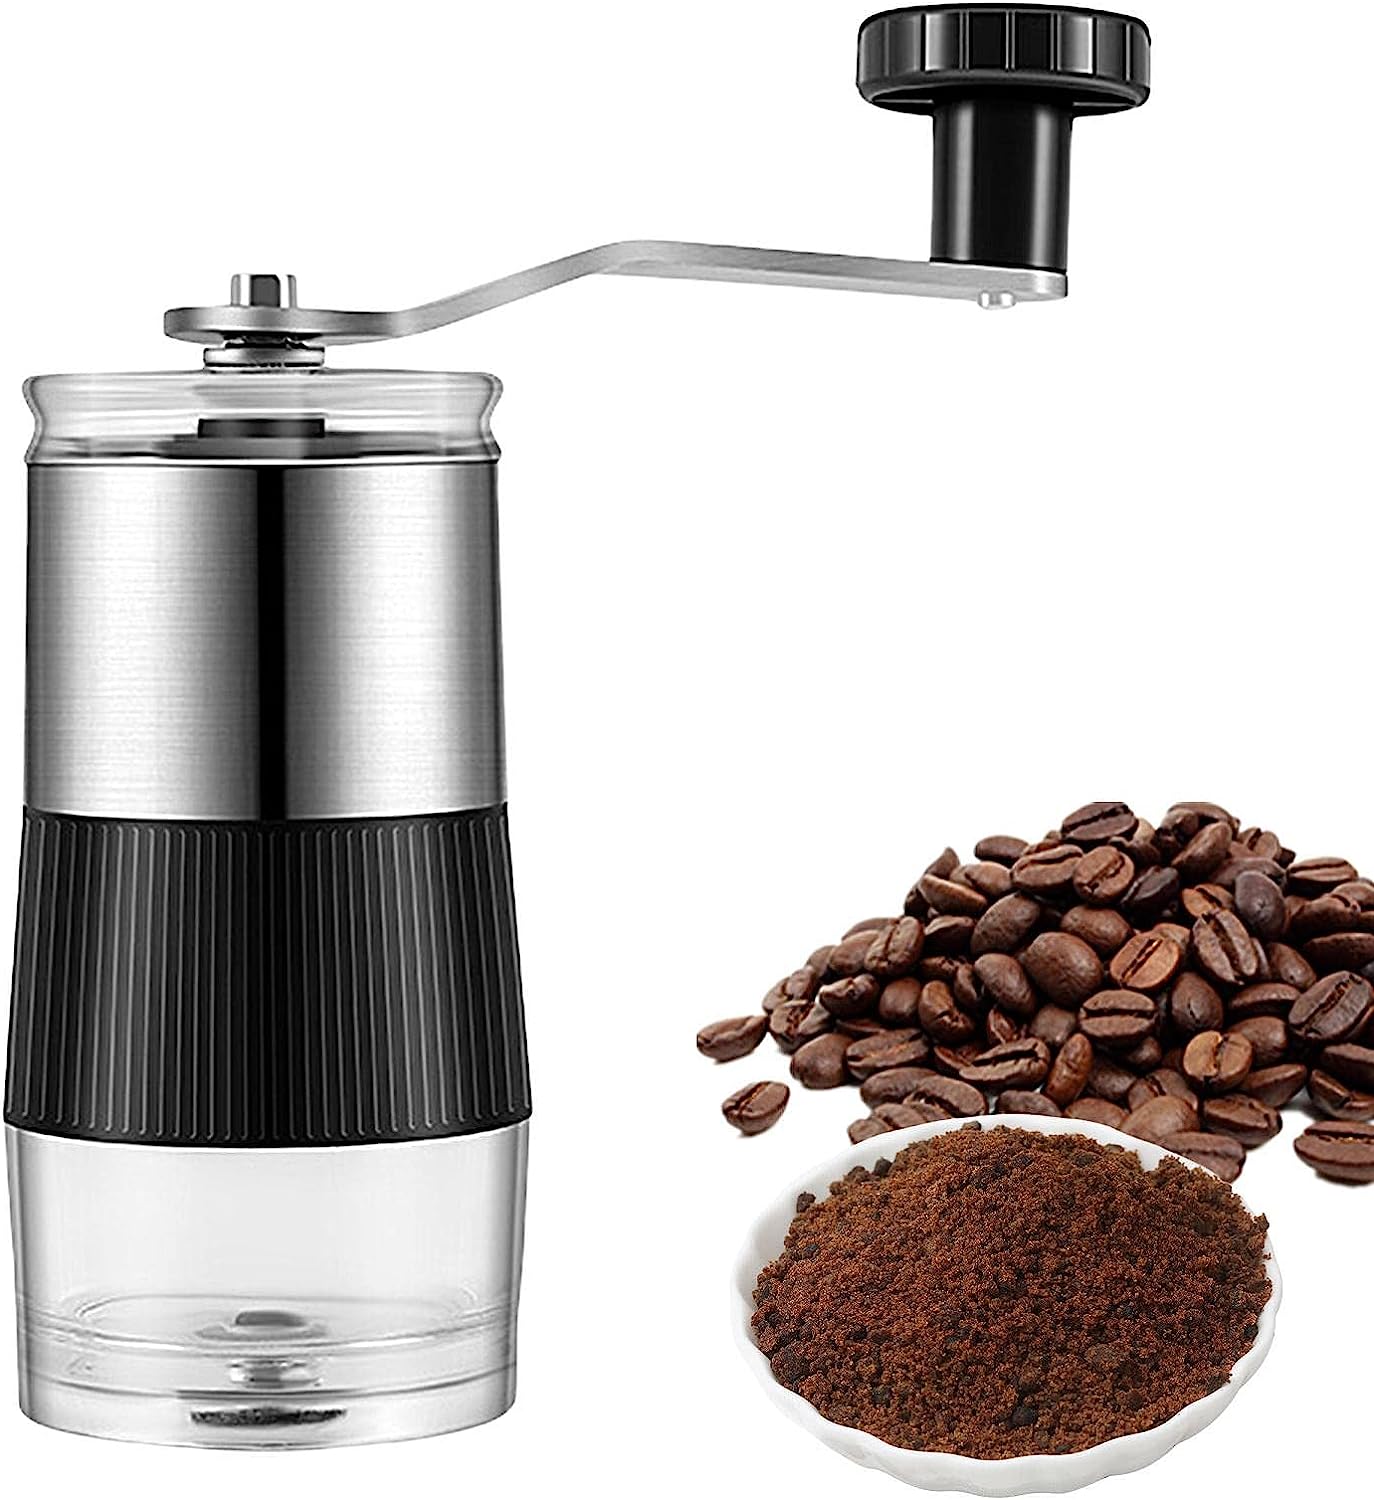 HEYCE Portable Coffee Grinder, Manual Coffee Grinder, Manual Coffee Bean Mill, Manual Burr Hand Coffee Grinder, Unique Gift, Perfect for Camping